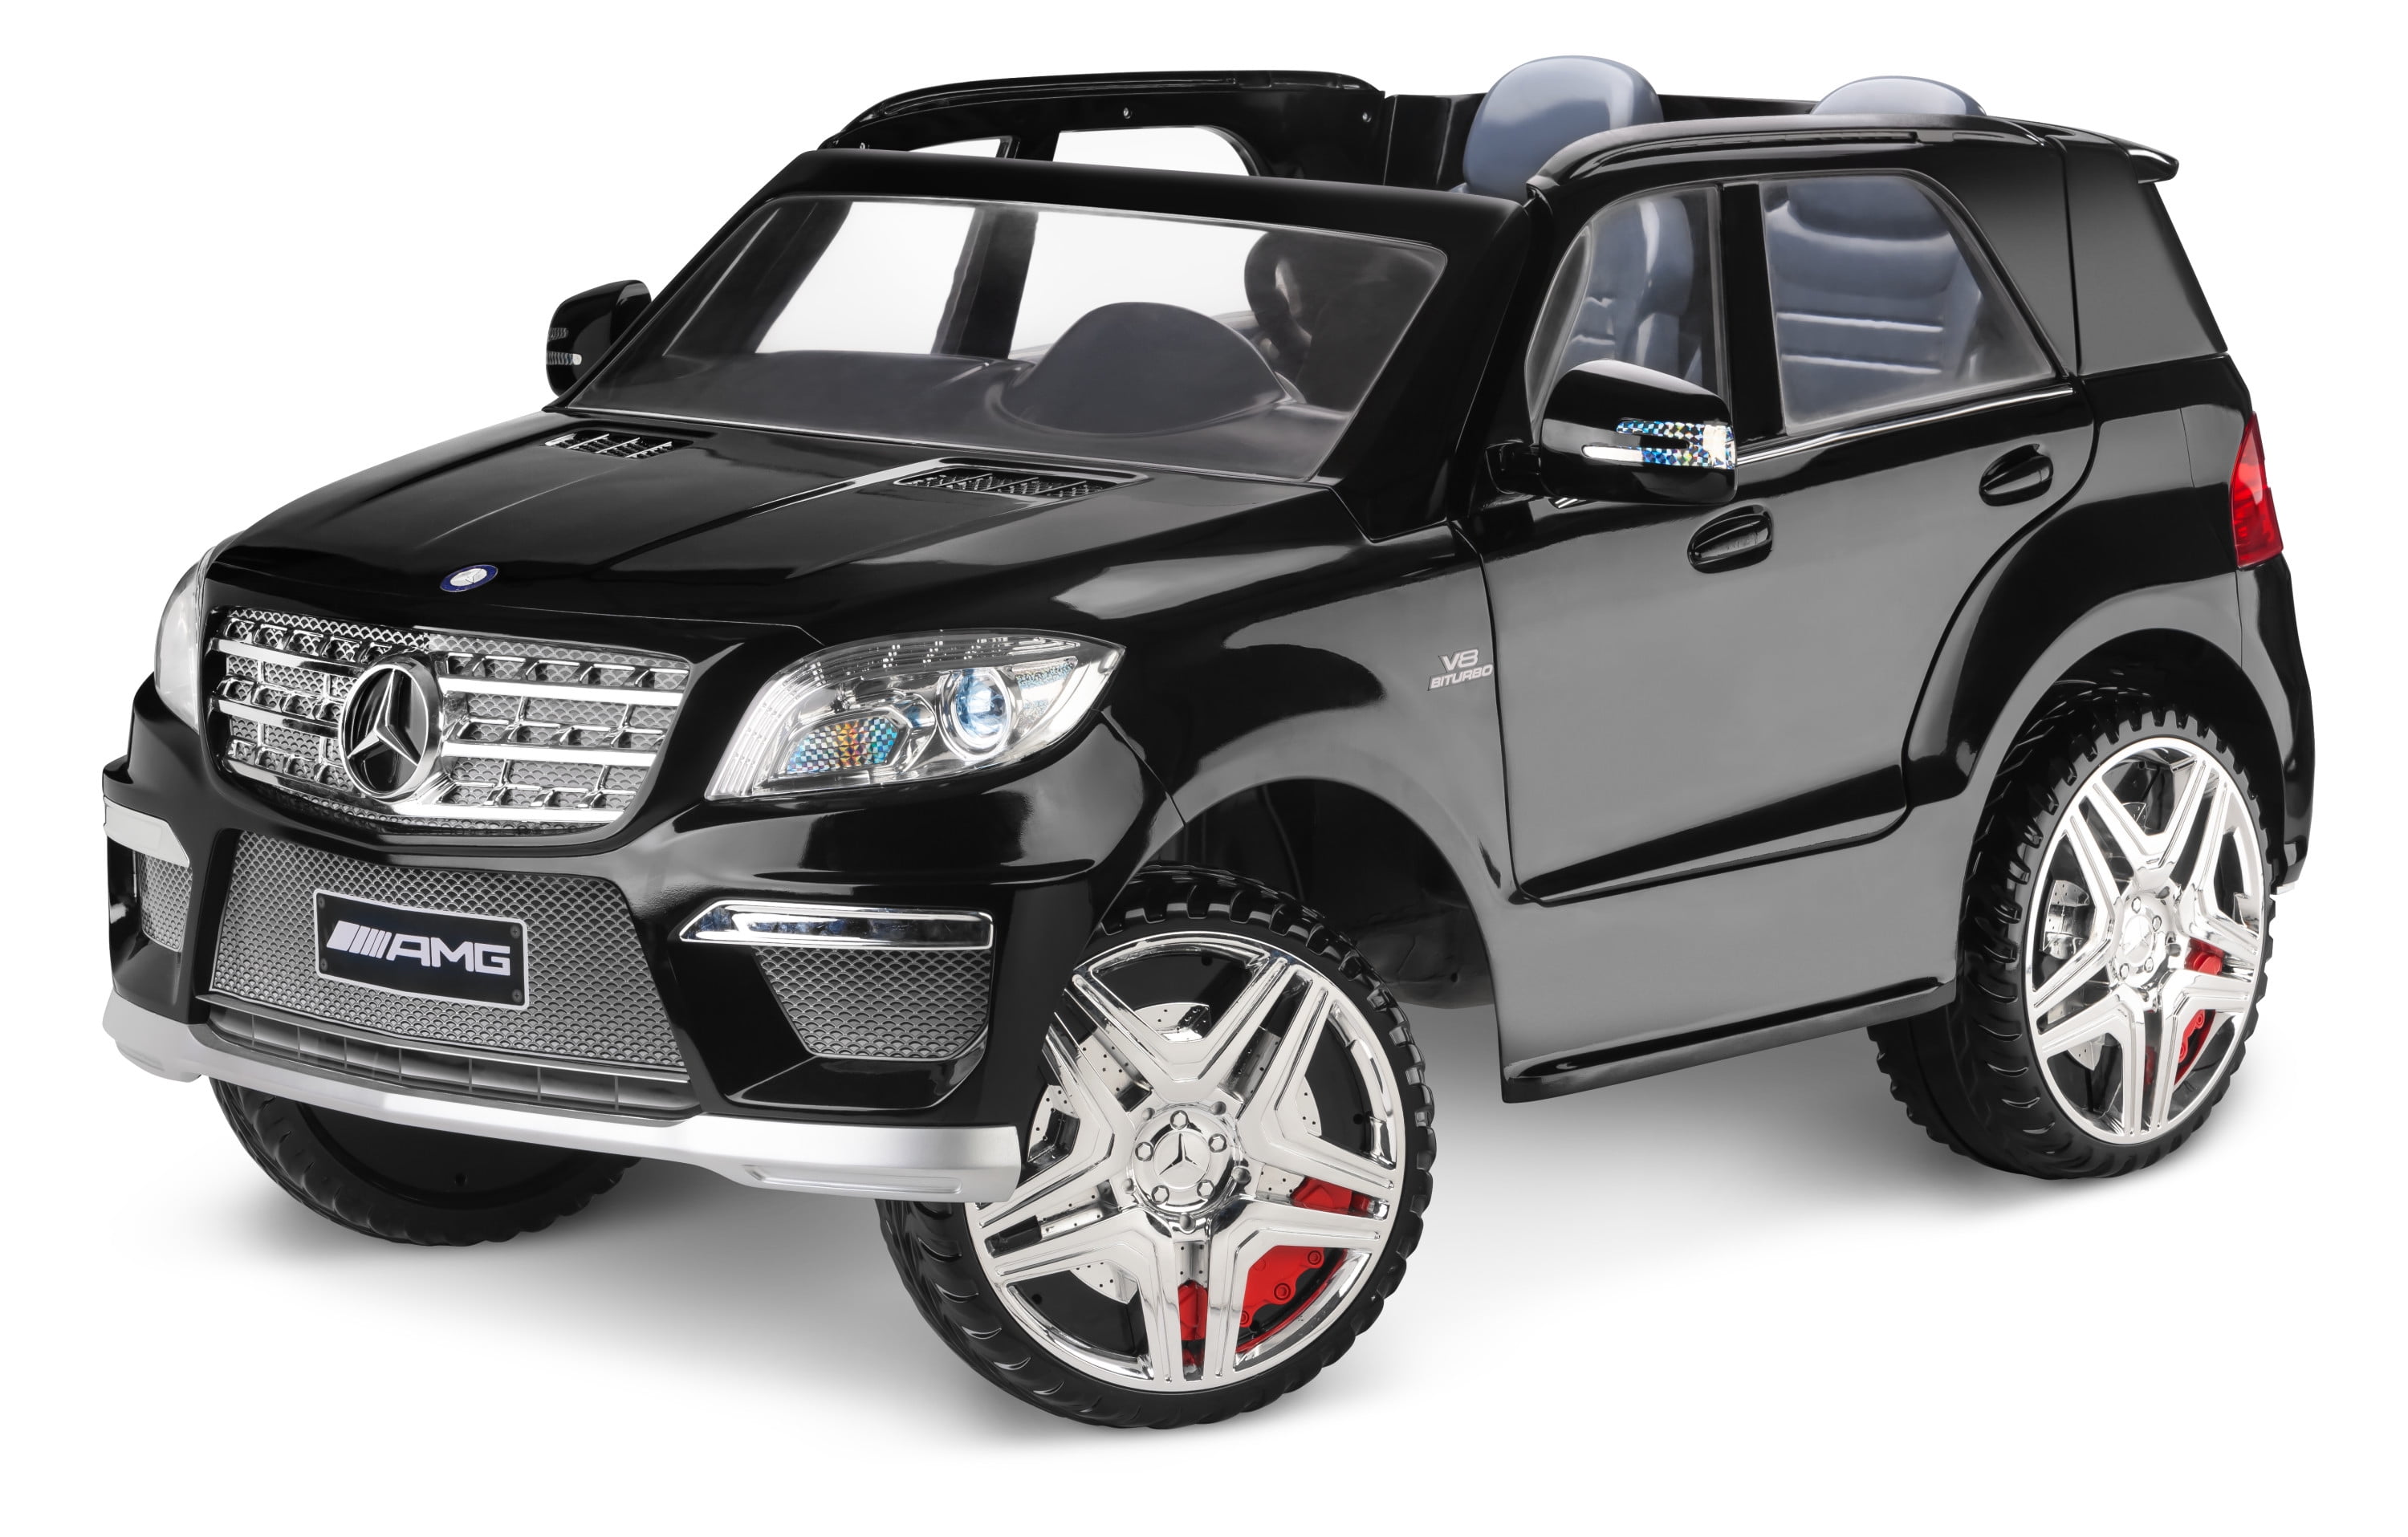 Mercedes Benz Ml63 Ride On Toy Car By Kid Trax Multiple